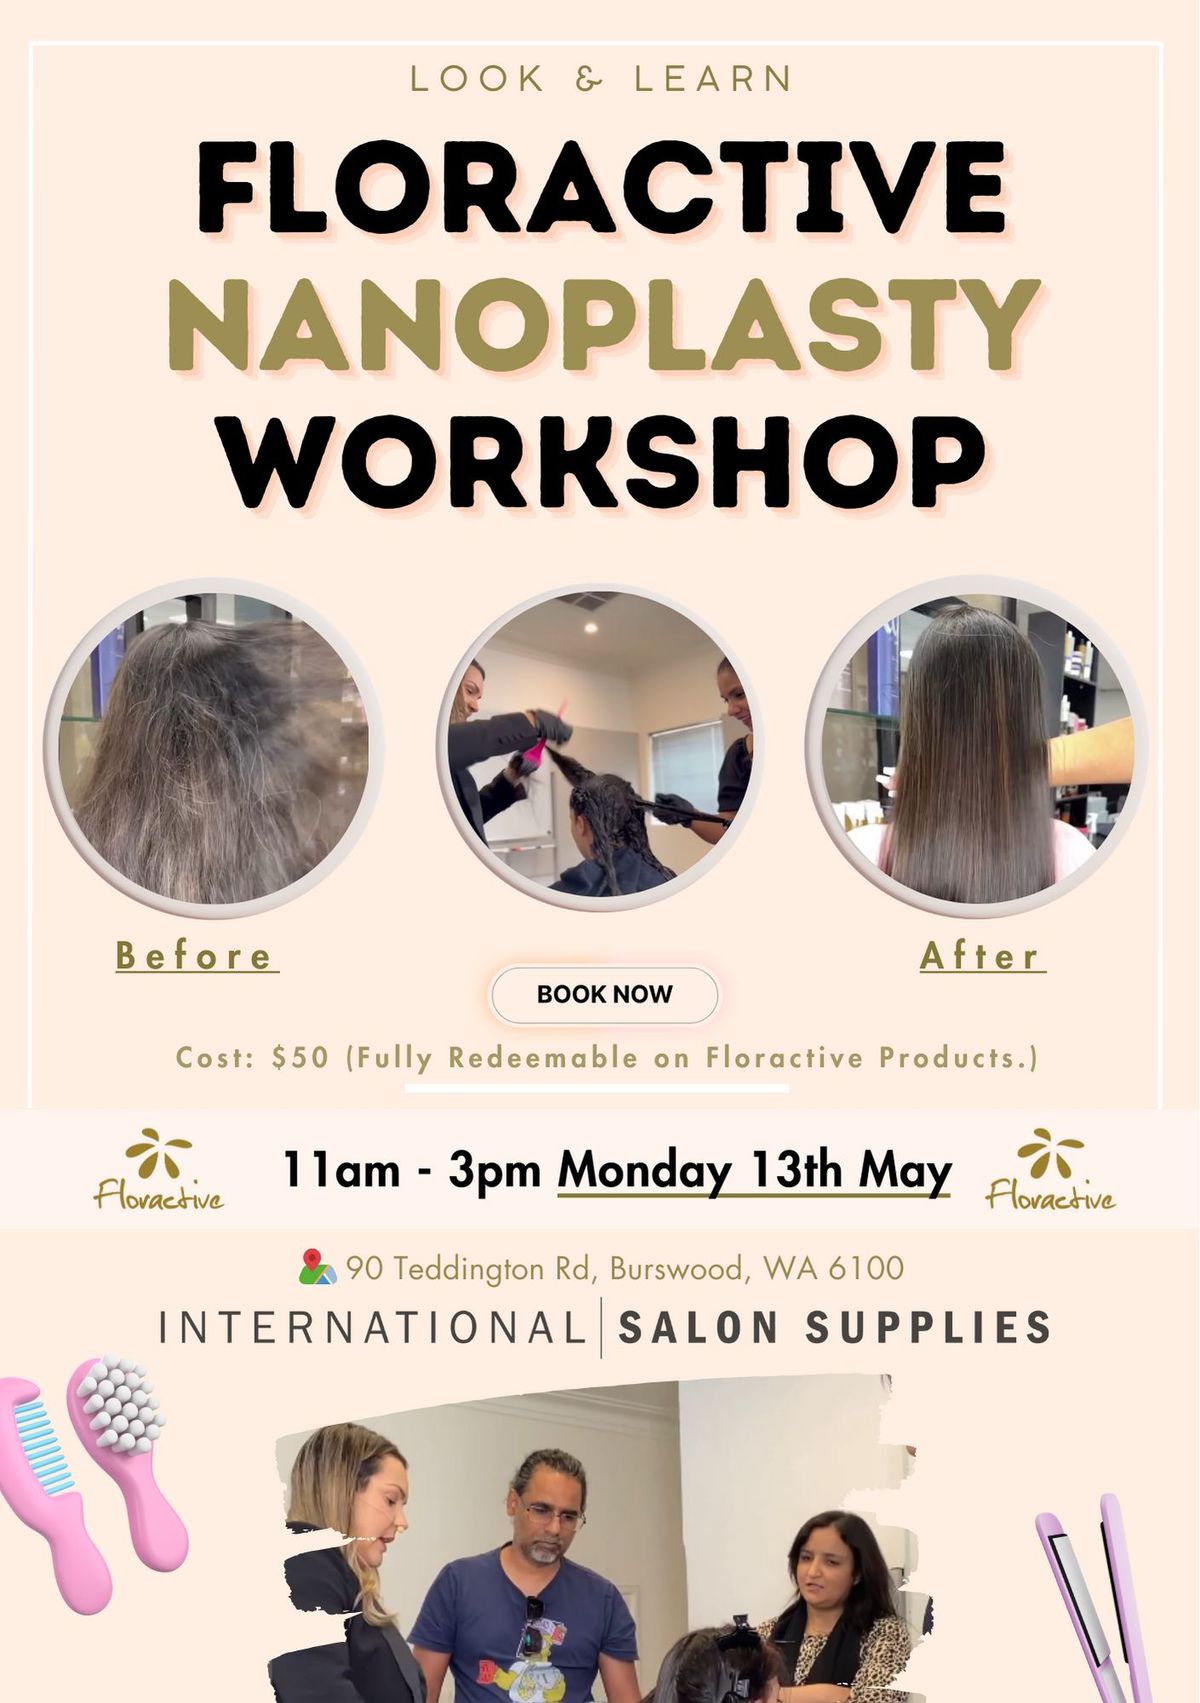 Floractive Nanoplasty Workshop Look & Learn \u2013 Monday 13th May 11am-3pm